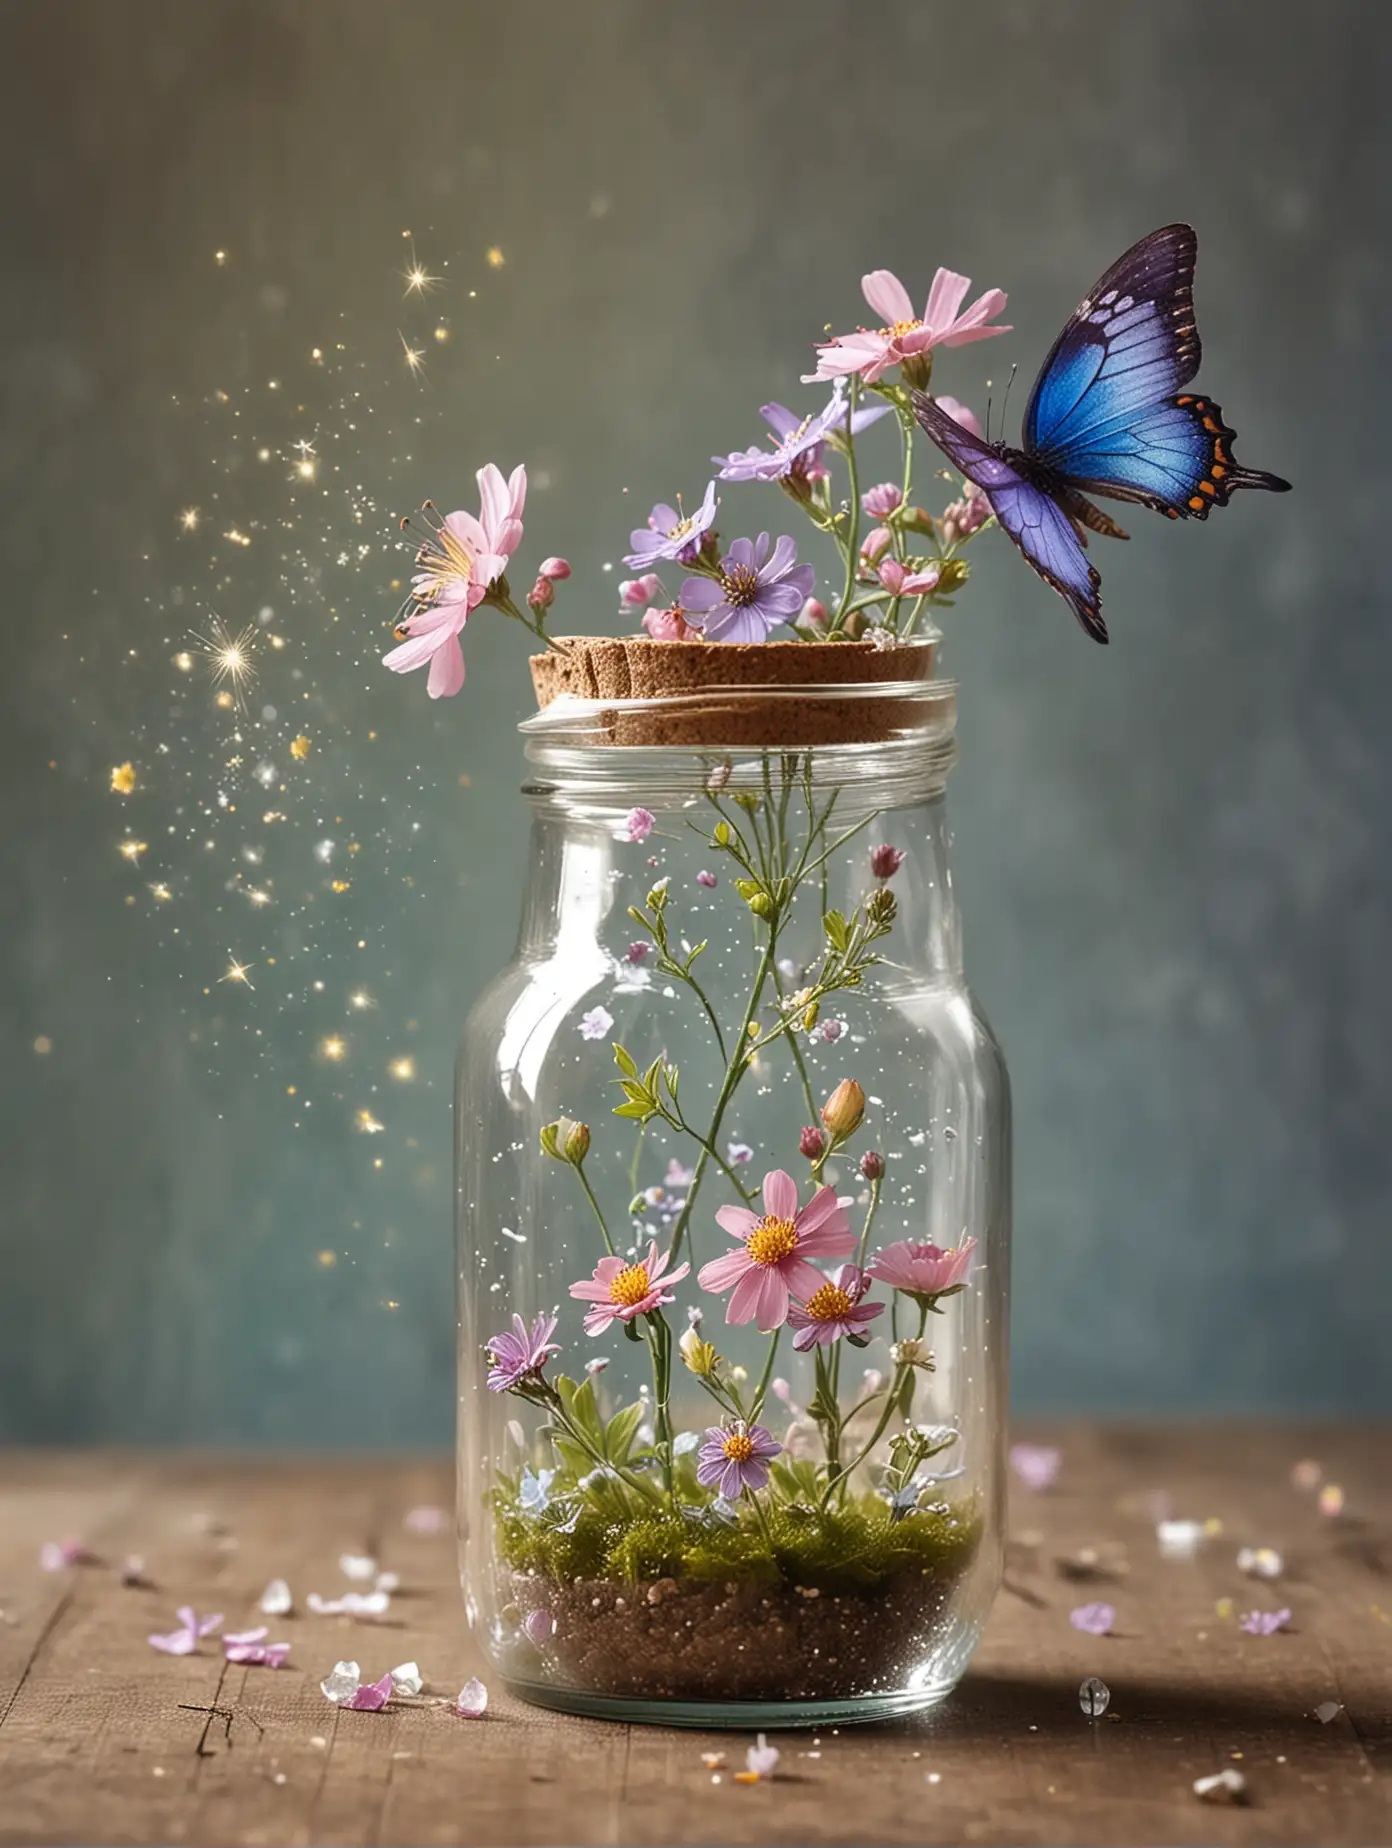 Magical Alchemy Glass Jar Sprinkling Butterflies and Sparkling Flowers